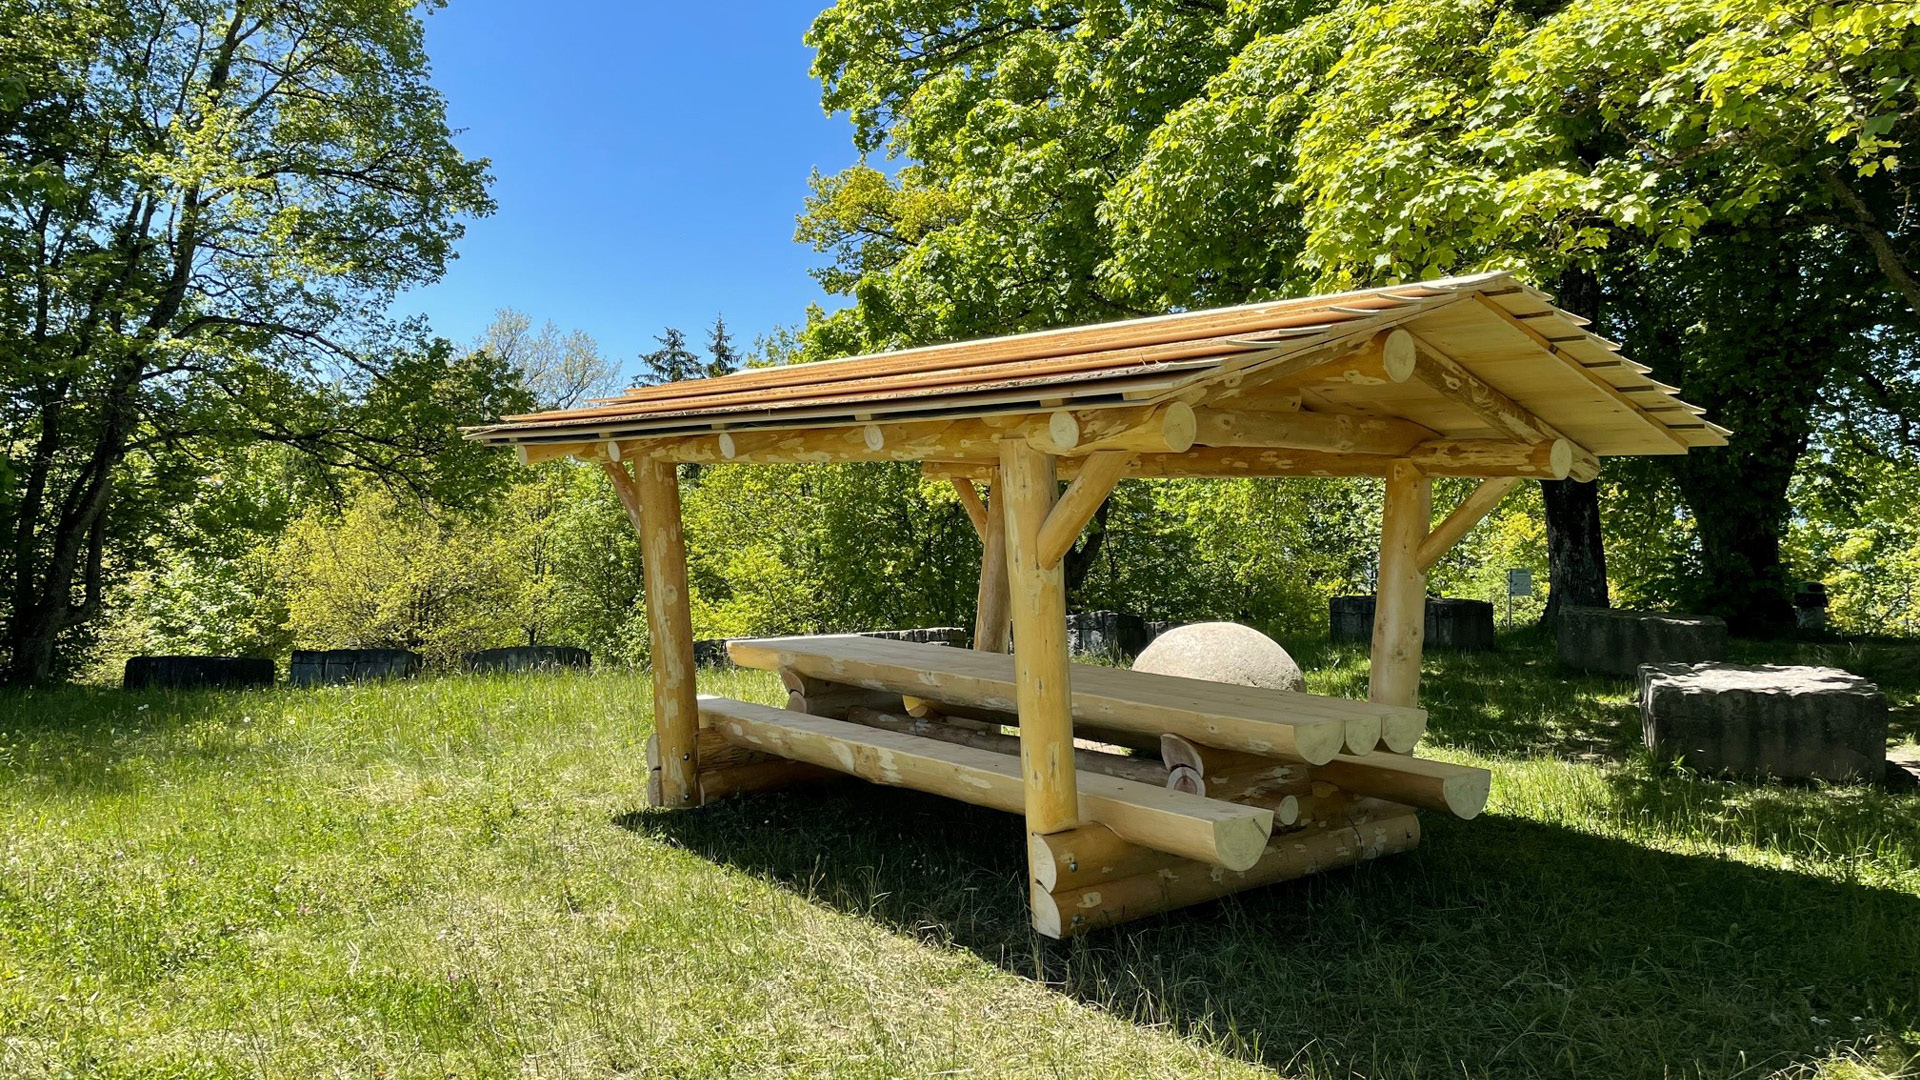 Outdoor wooden seminar table in the park